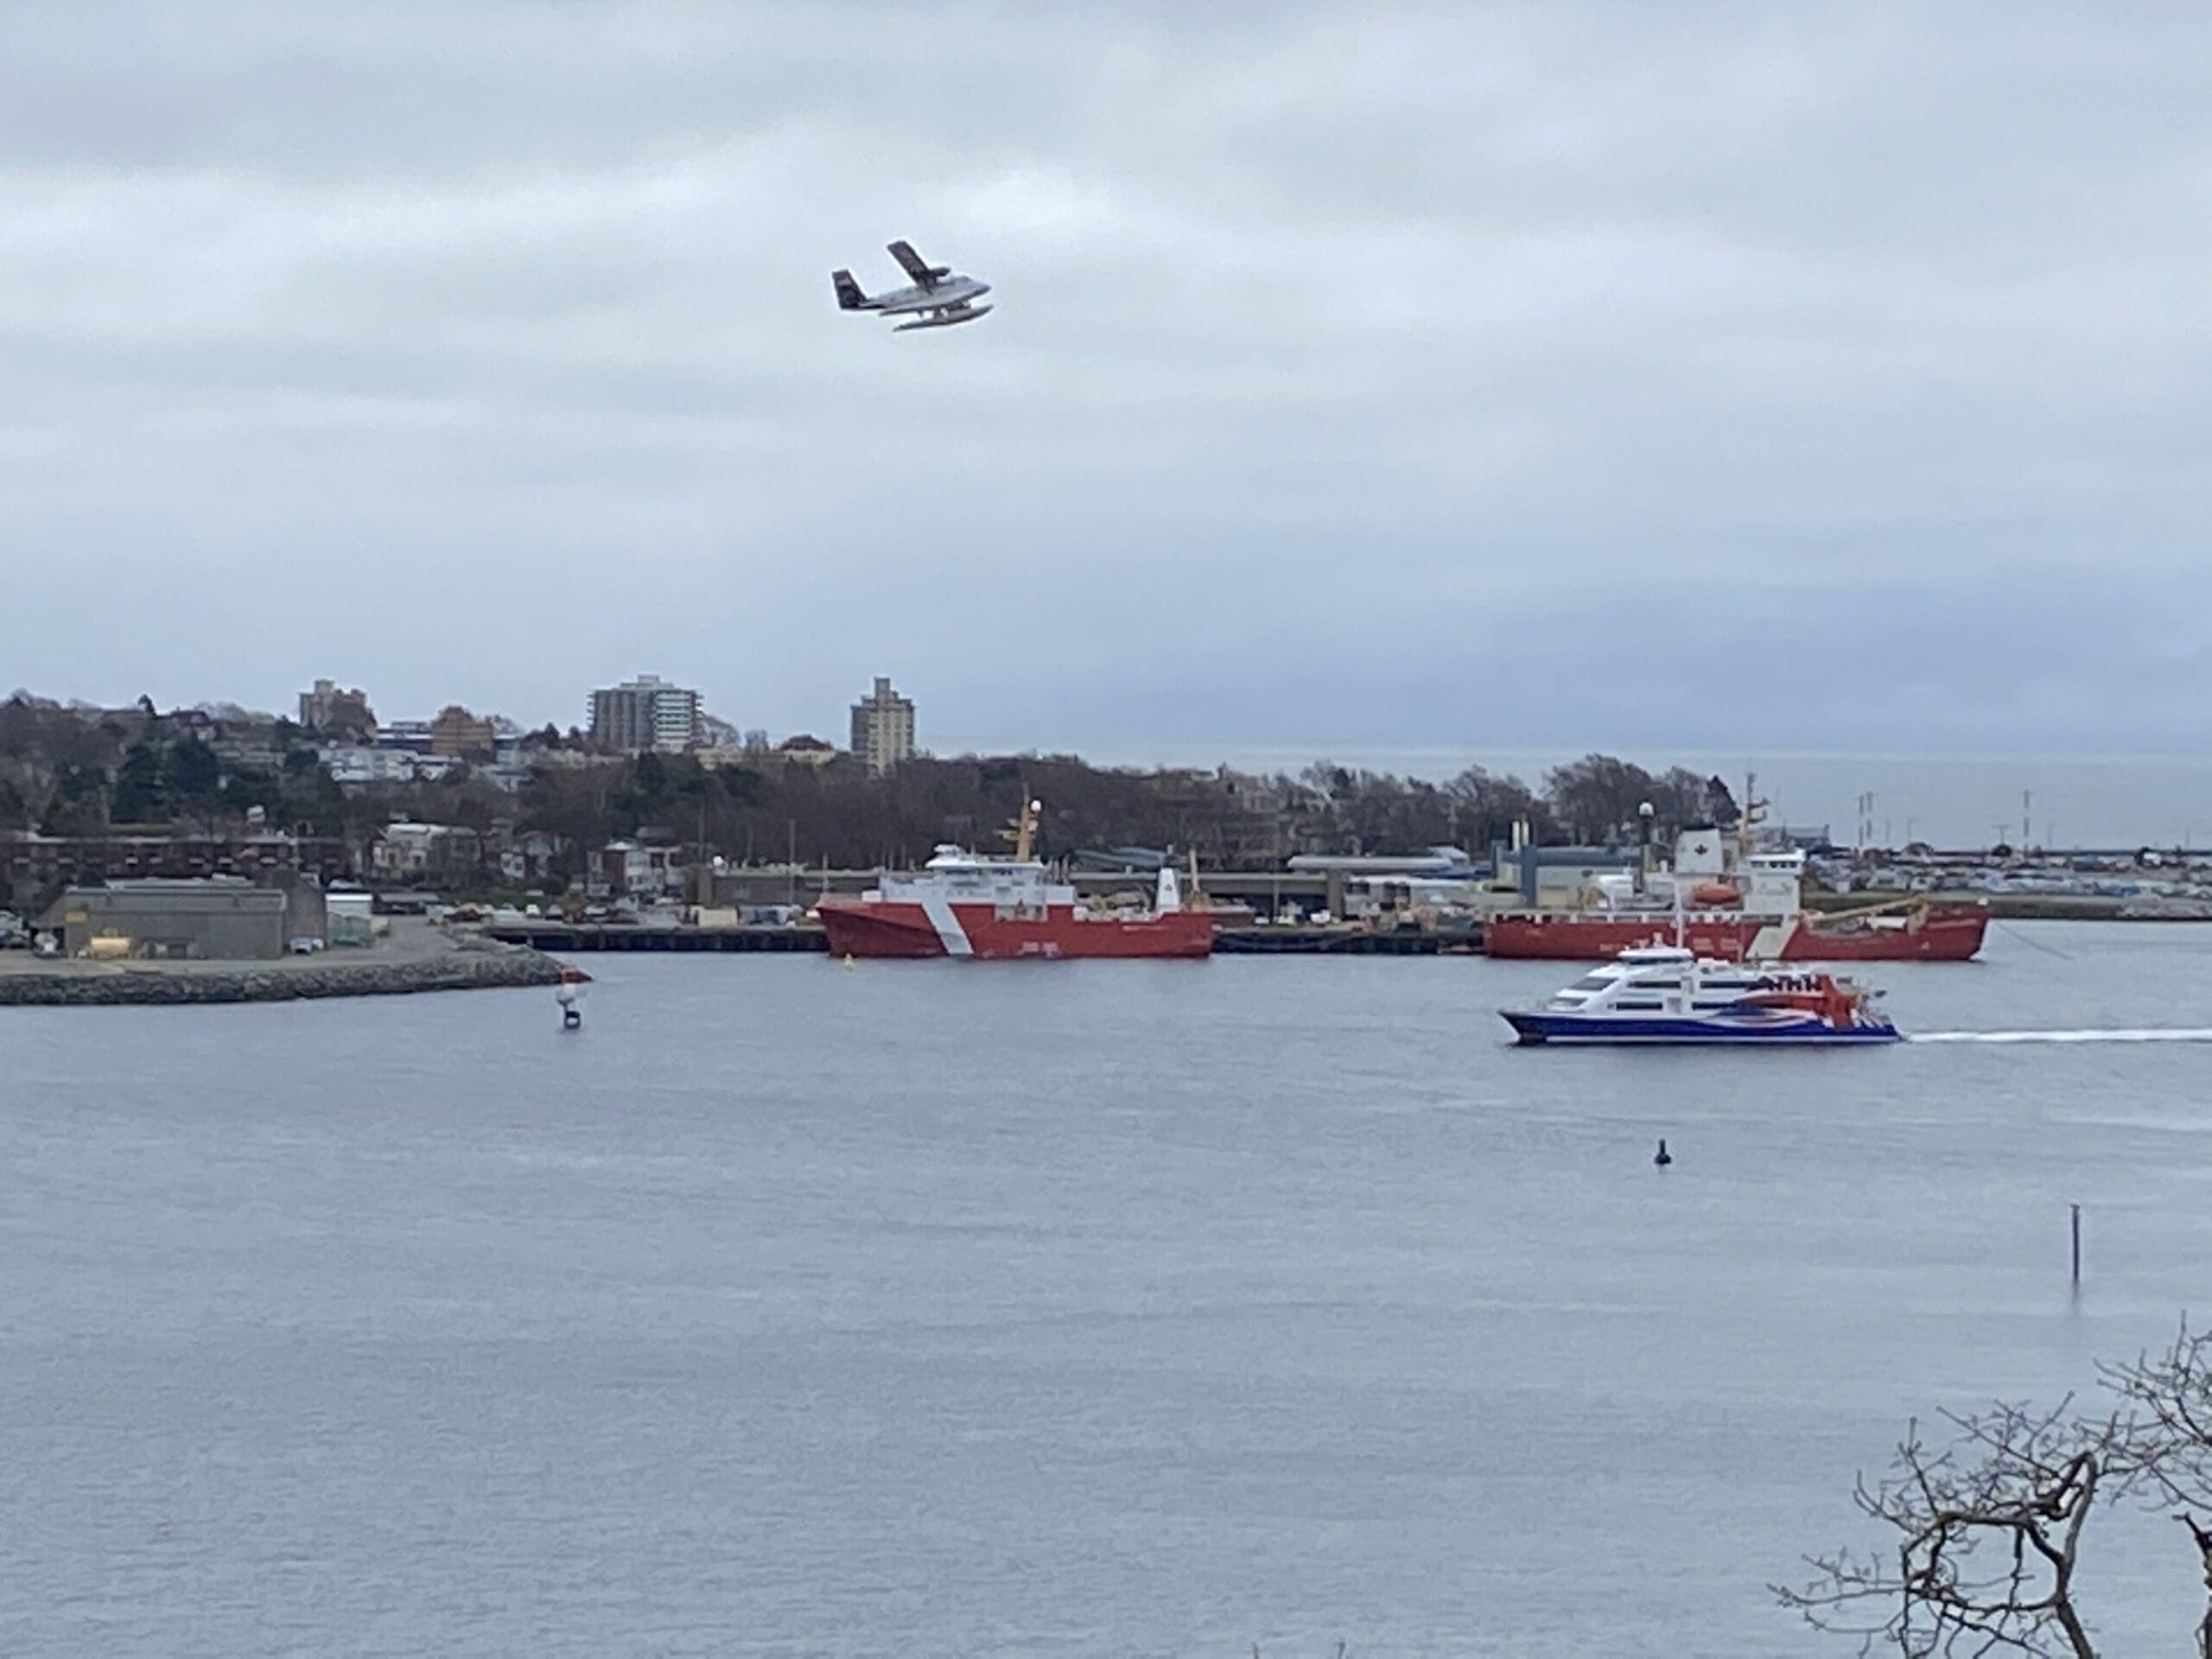 A bucket list idea, landing on water, is possible in Victoria BC by taking a float plane, either to arrive or leave from Victoria, or simply a sight-seeing tour.  Pictured here is a float plane over Victoria Harbour.